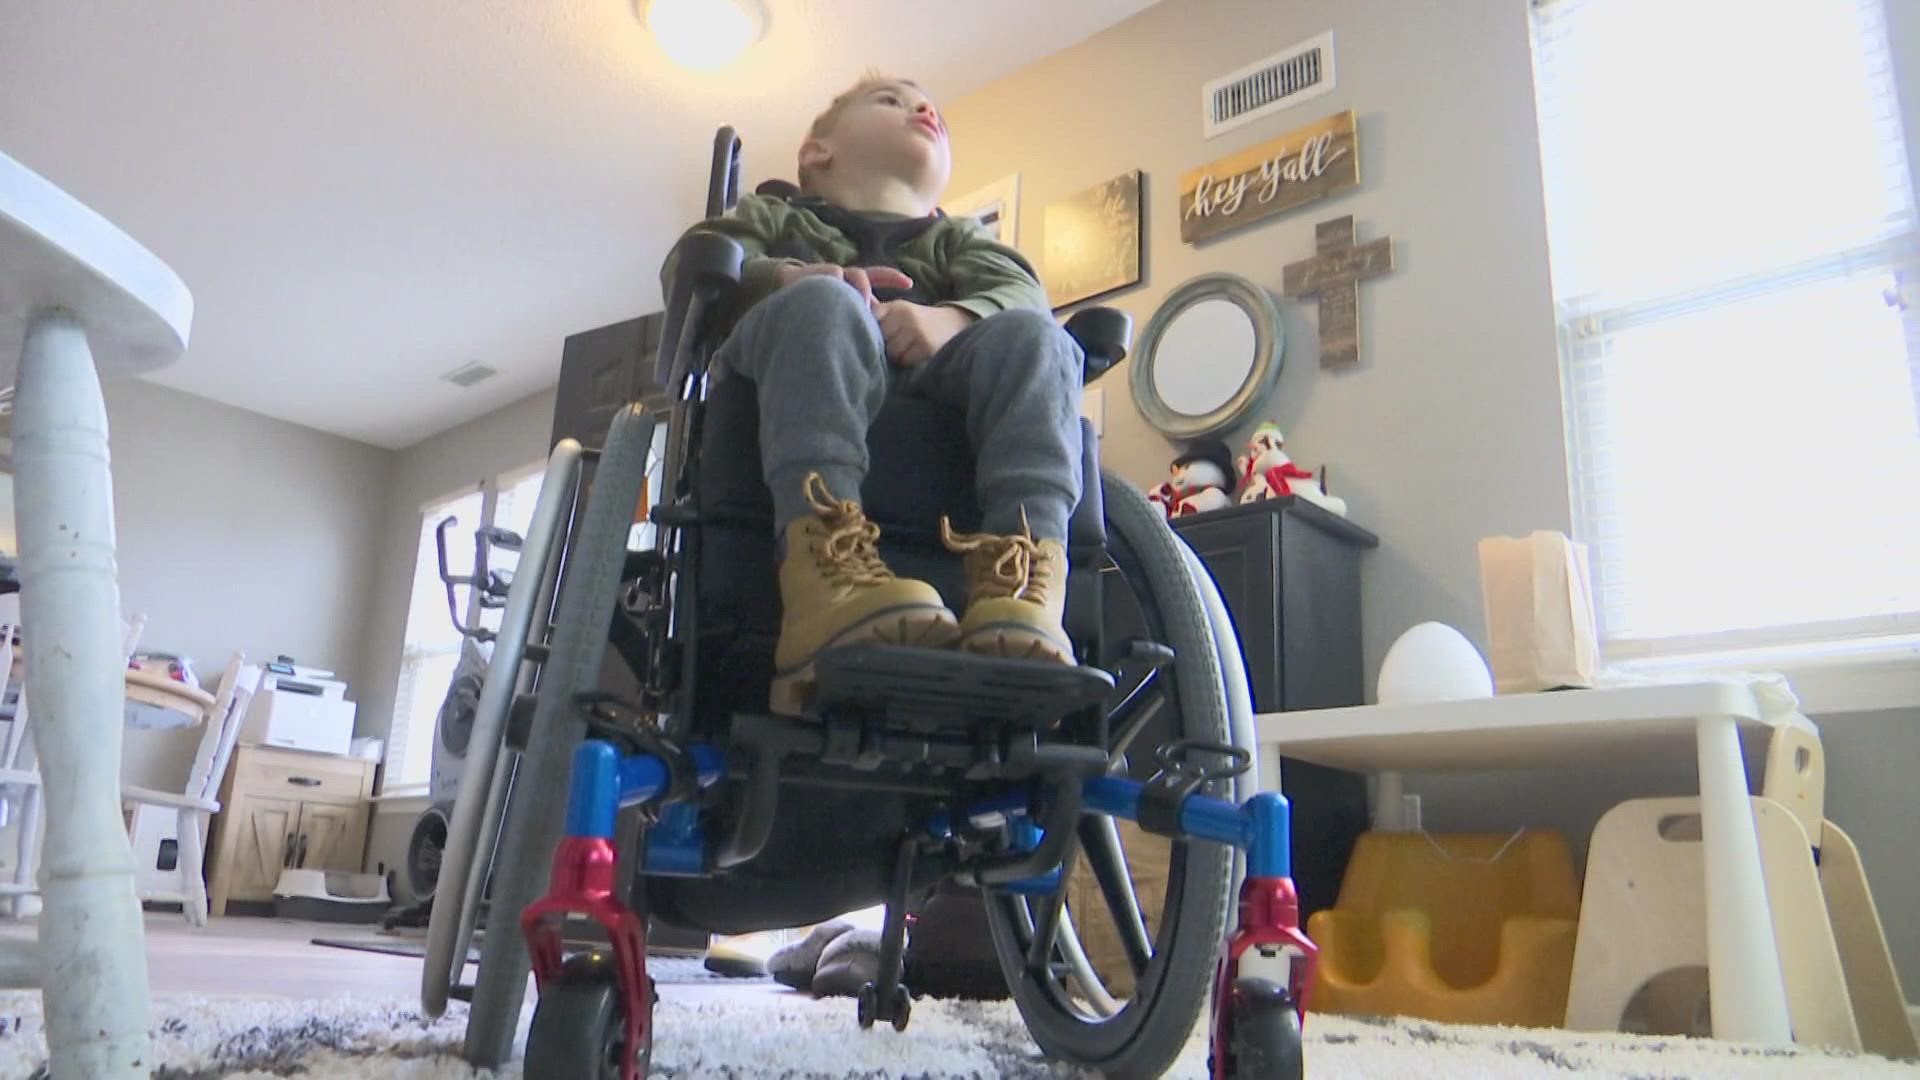 A 3-year-old who waited over a year for the proper wheelchair was gifted one by the company after his story aired on 13News.